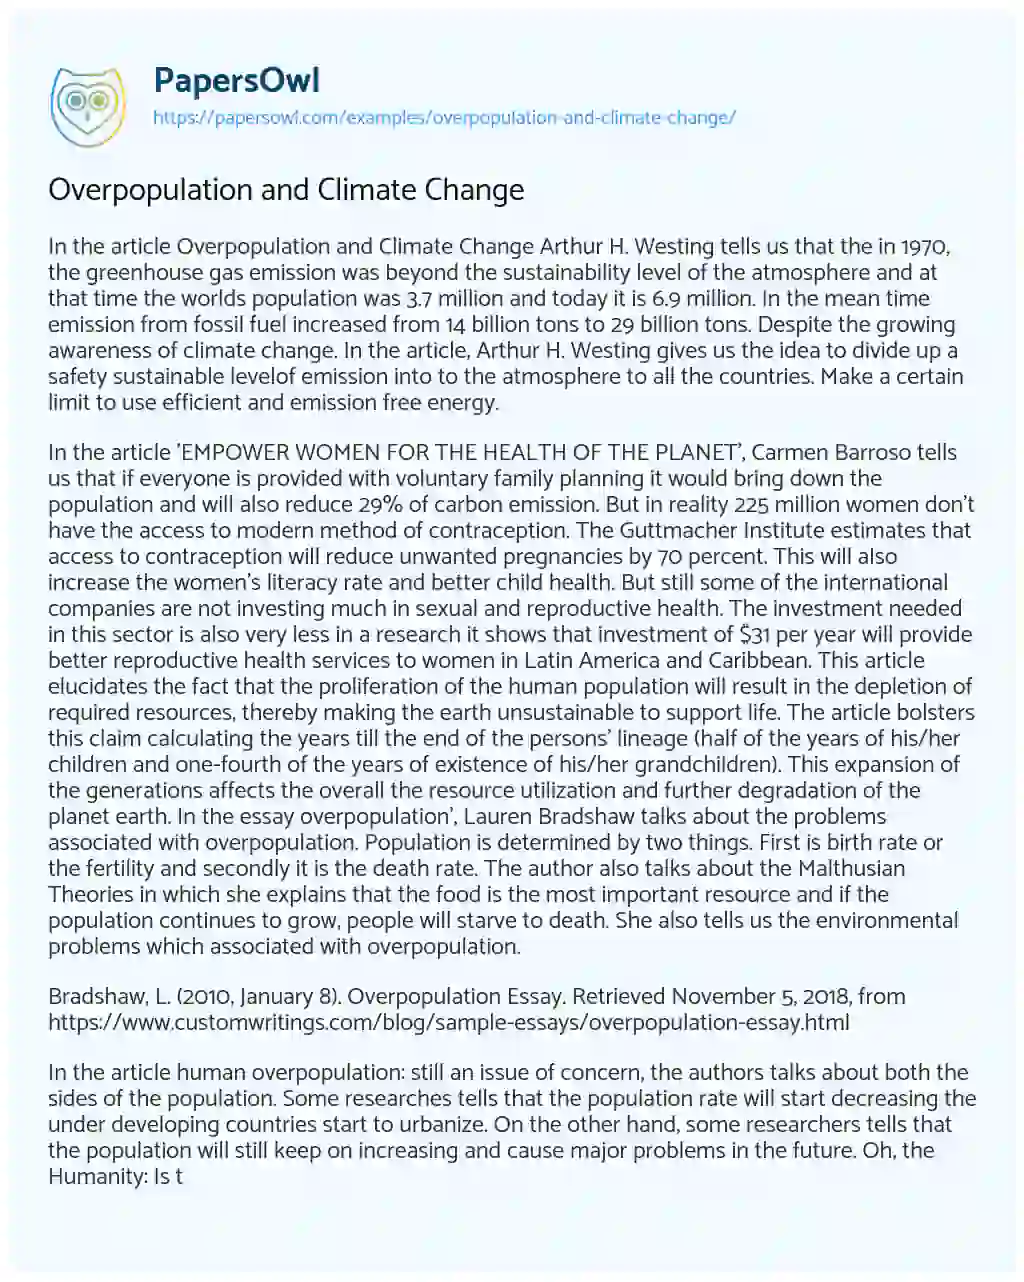 Essay on Overpopulation and Climate Change